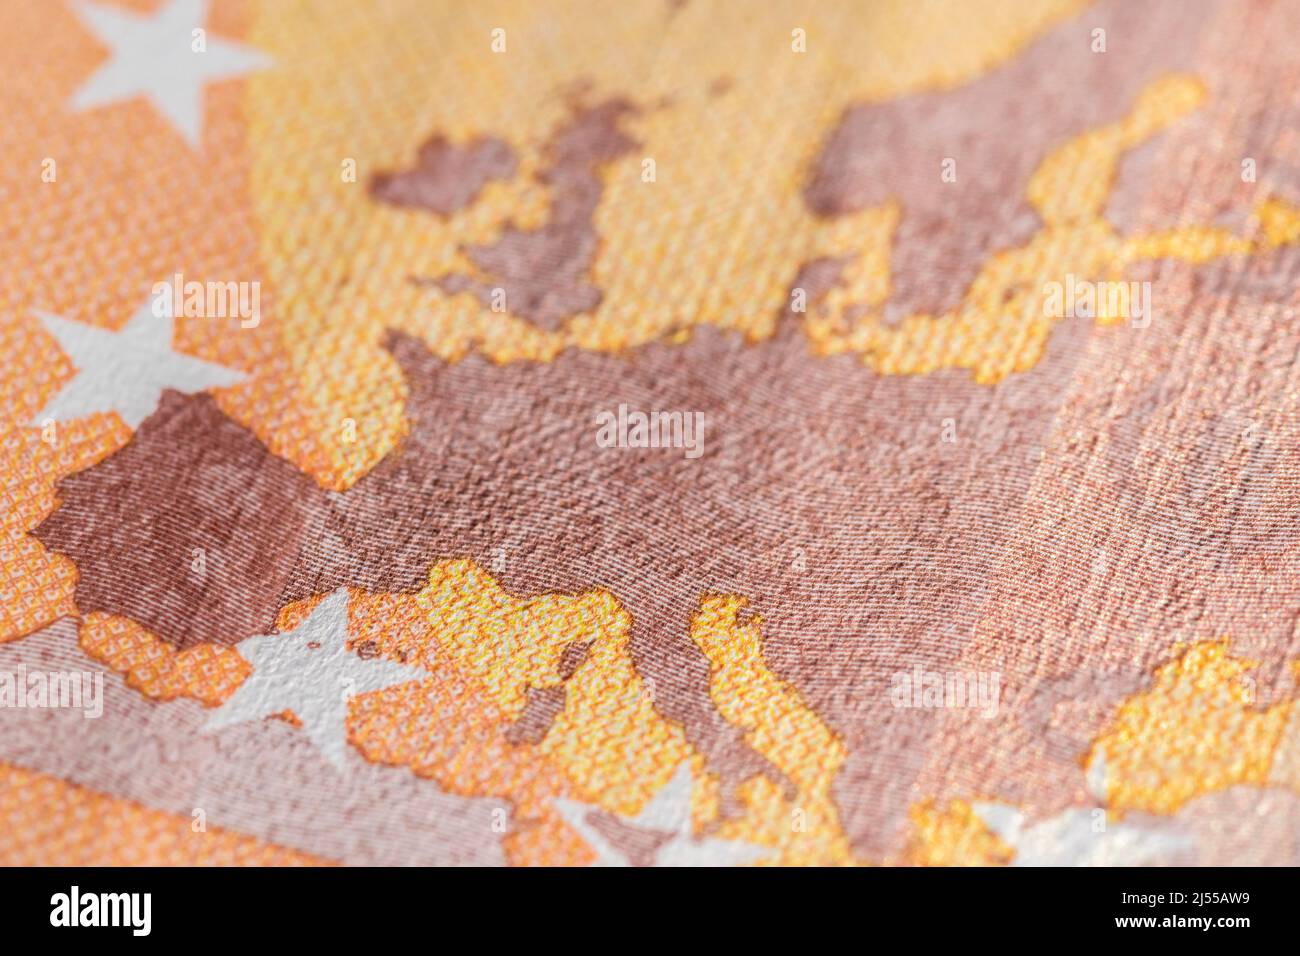 Close-up shot of Europe's map displayed on Euro banknote Stock Photo